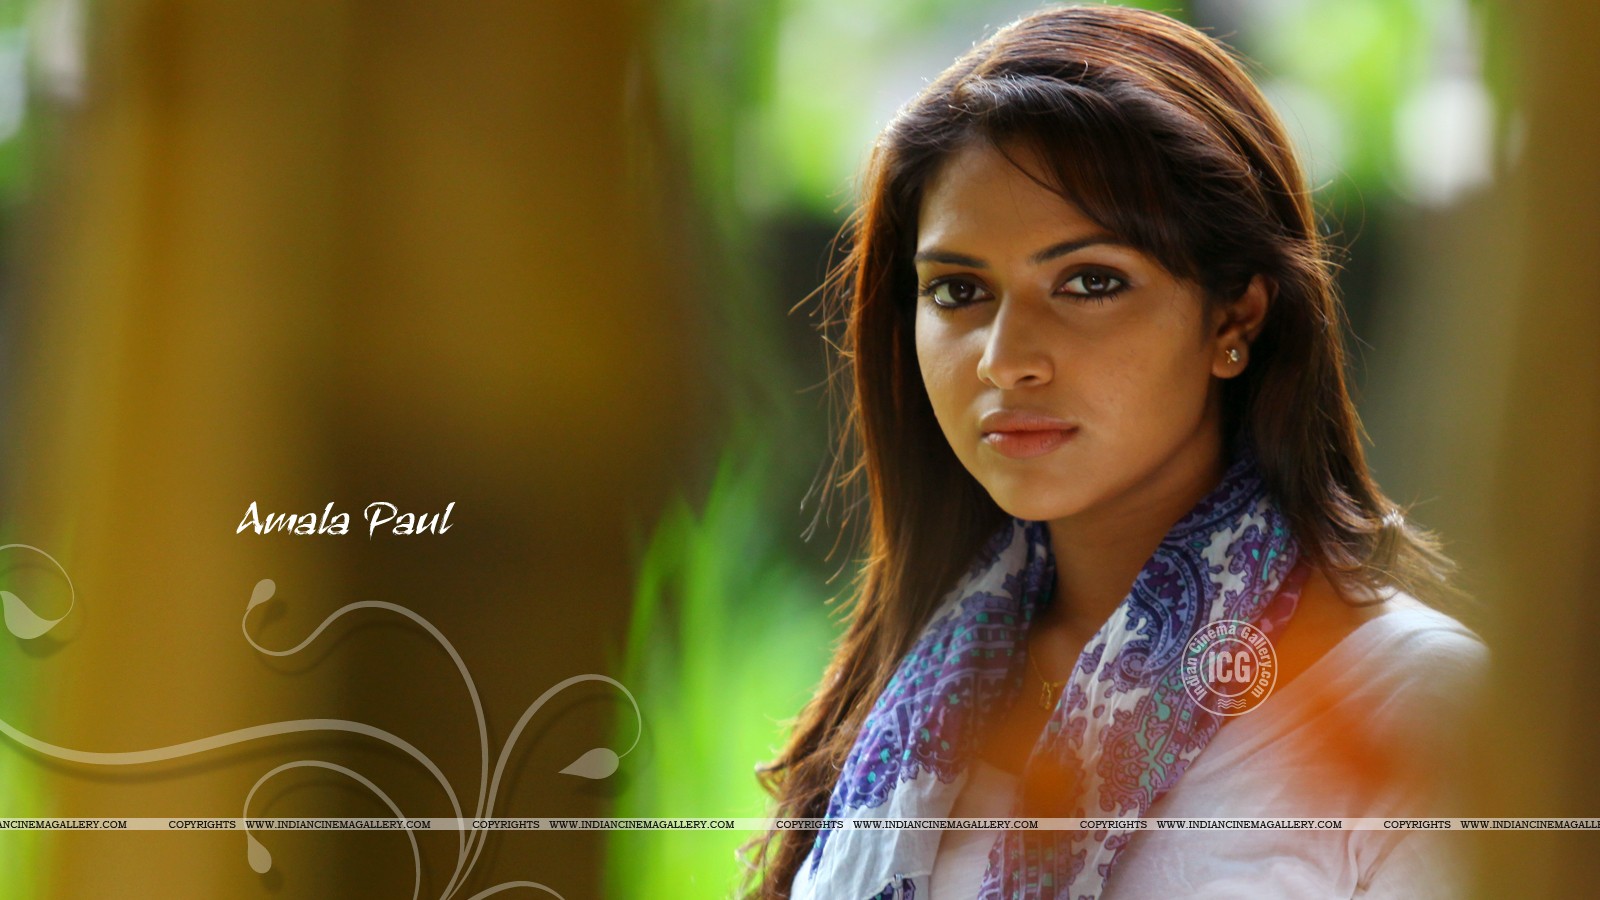 Actress Amala Paul HD Mobile Wallpapers free download